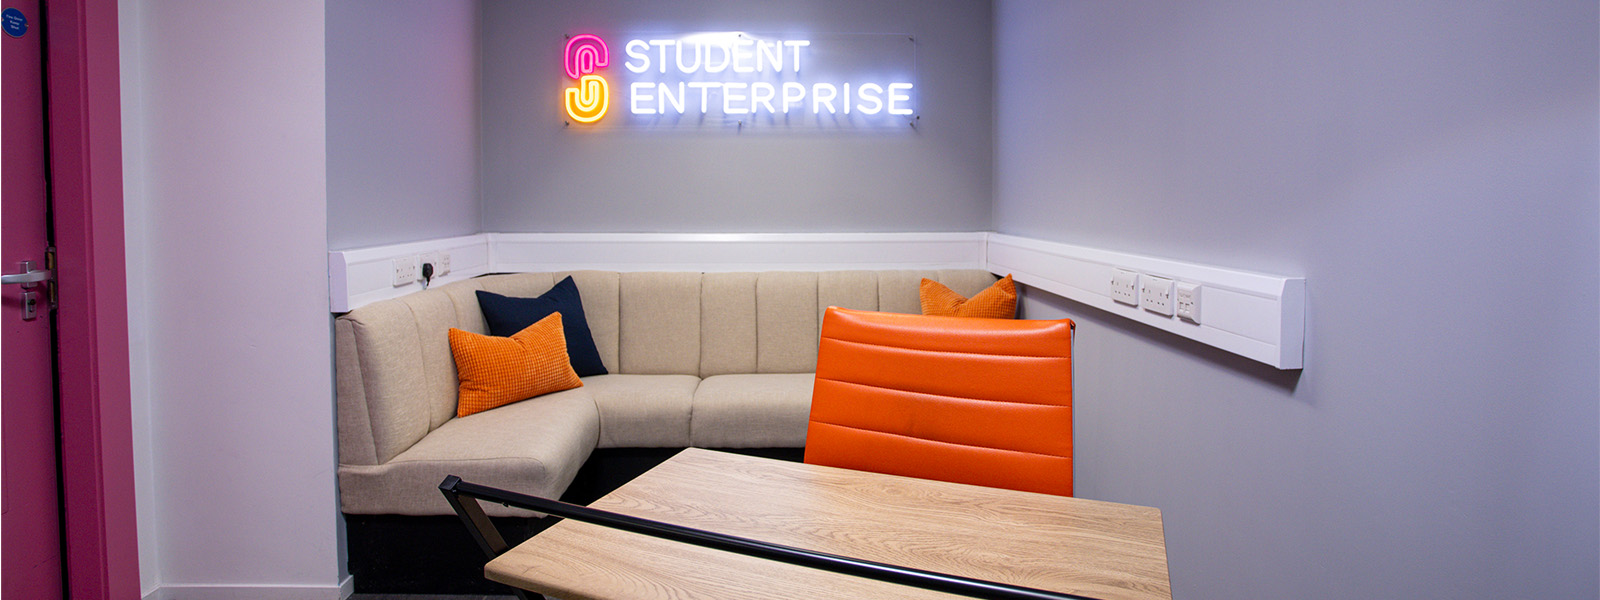 A sofa and a table behind a student enterprise sign